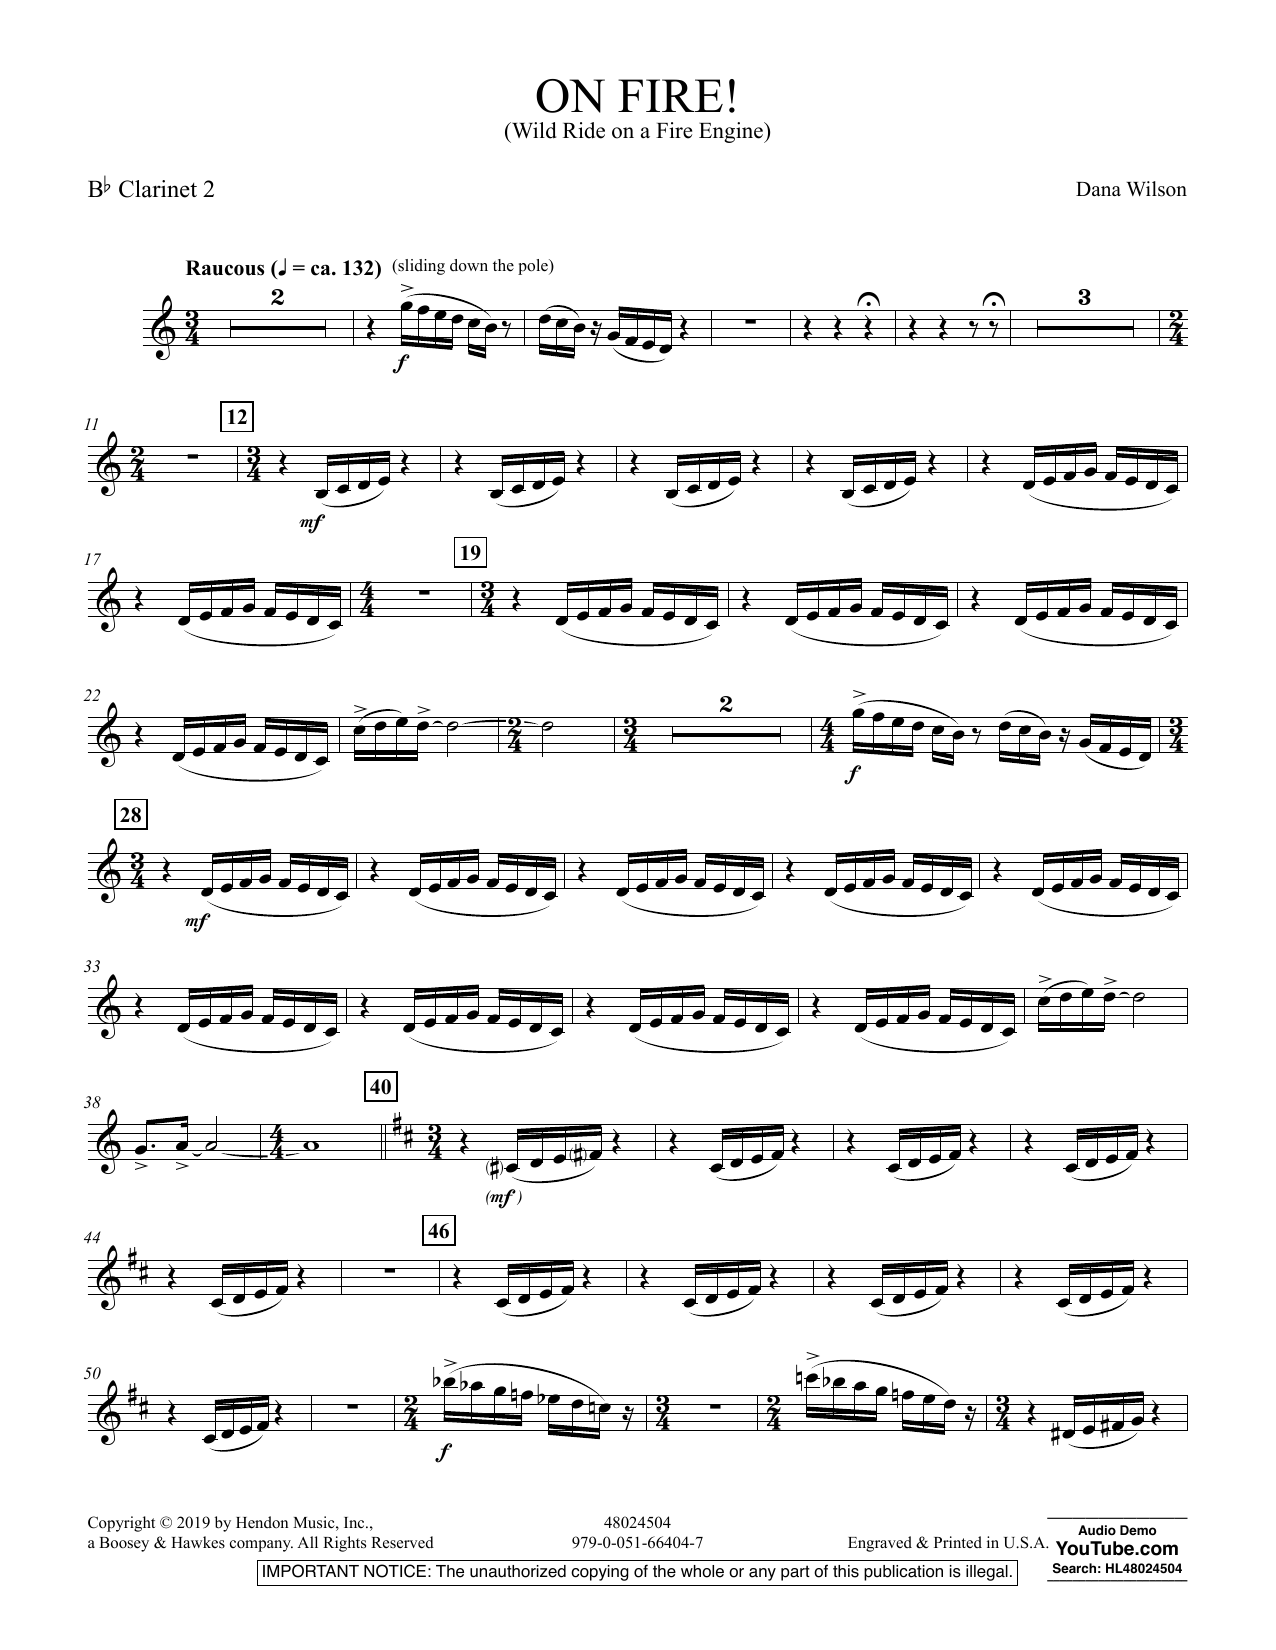 Dana Wilson On Fire! (Wild Ride on a Fire Engine) - Bb Clarinet 2 sheet music preview music notes and score for Concert Band including 2 page(s)